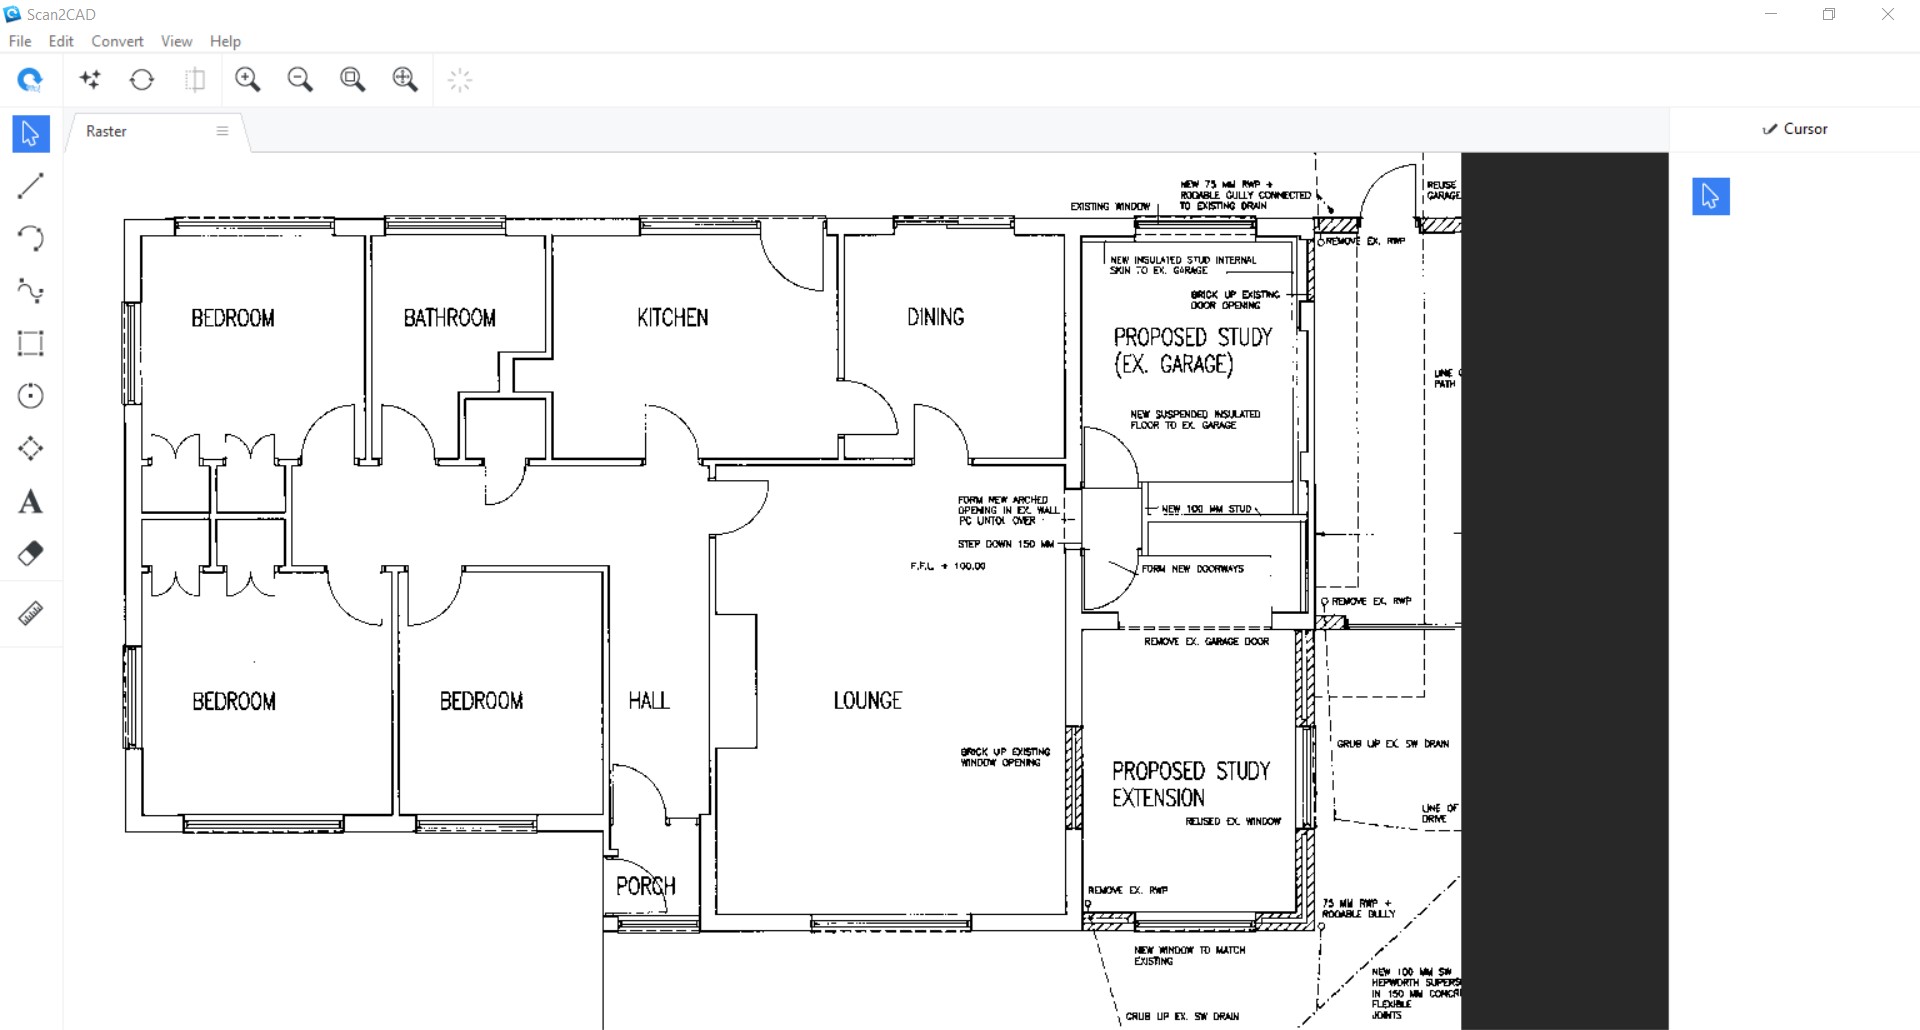 Converting a raster floor plan on Scan2CAD